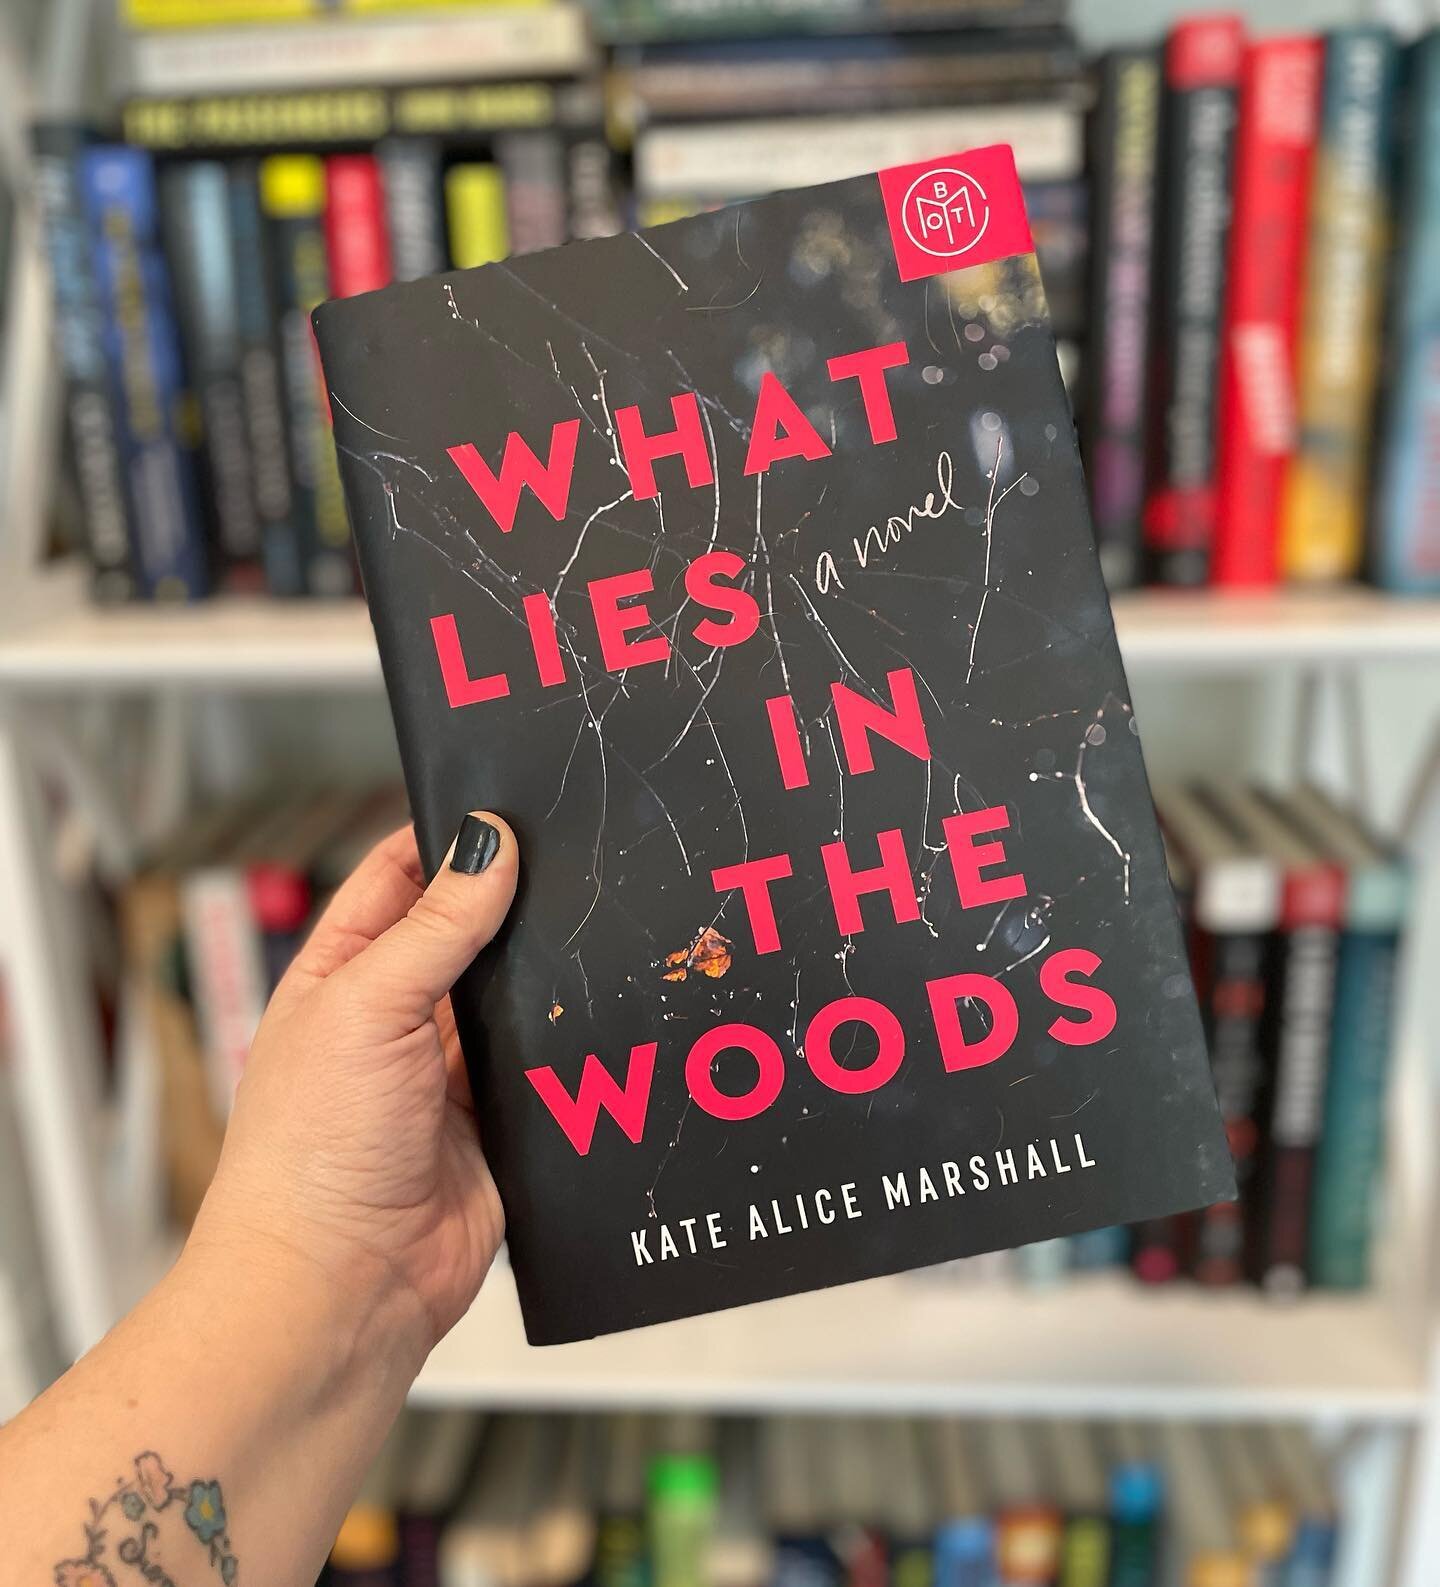 📖 WHAT LIES IN THE WOODS by Kate Alice Marshall

🕵🏻 Three young girls survive a serial killer and put him in prison. They were heroes. They were liars. 

Decades later, when their monster dies in prison, Naomi, Cass and Liv get back together. Liv 